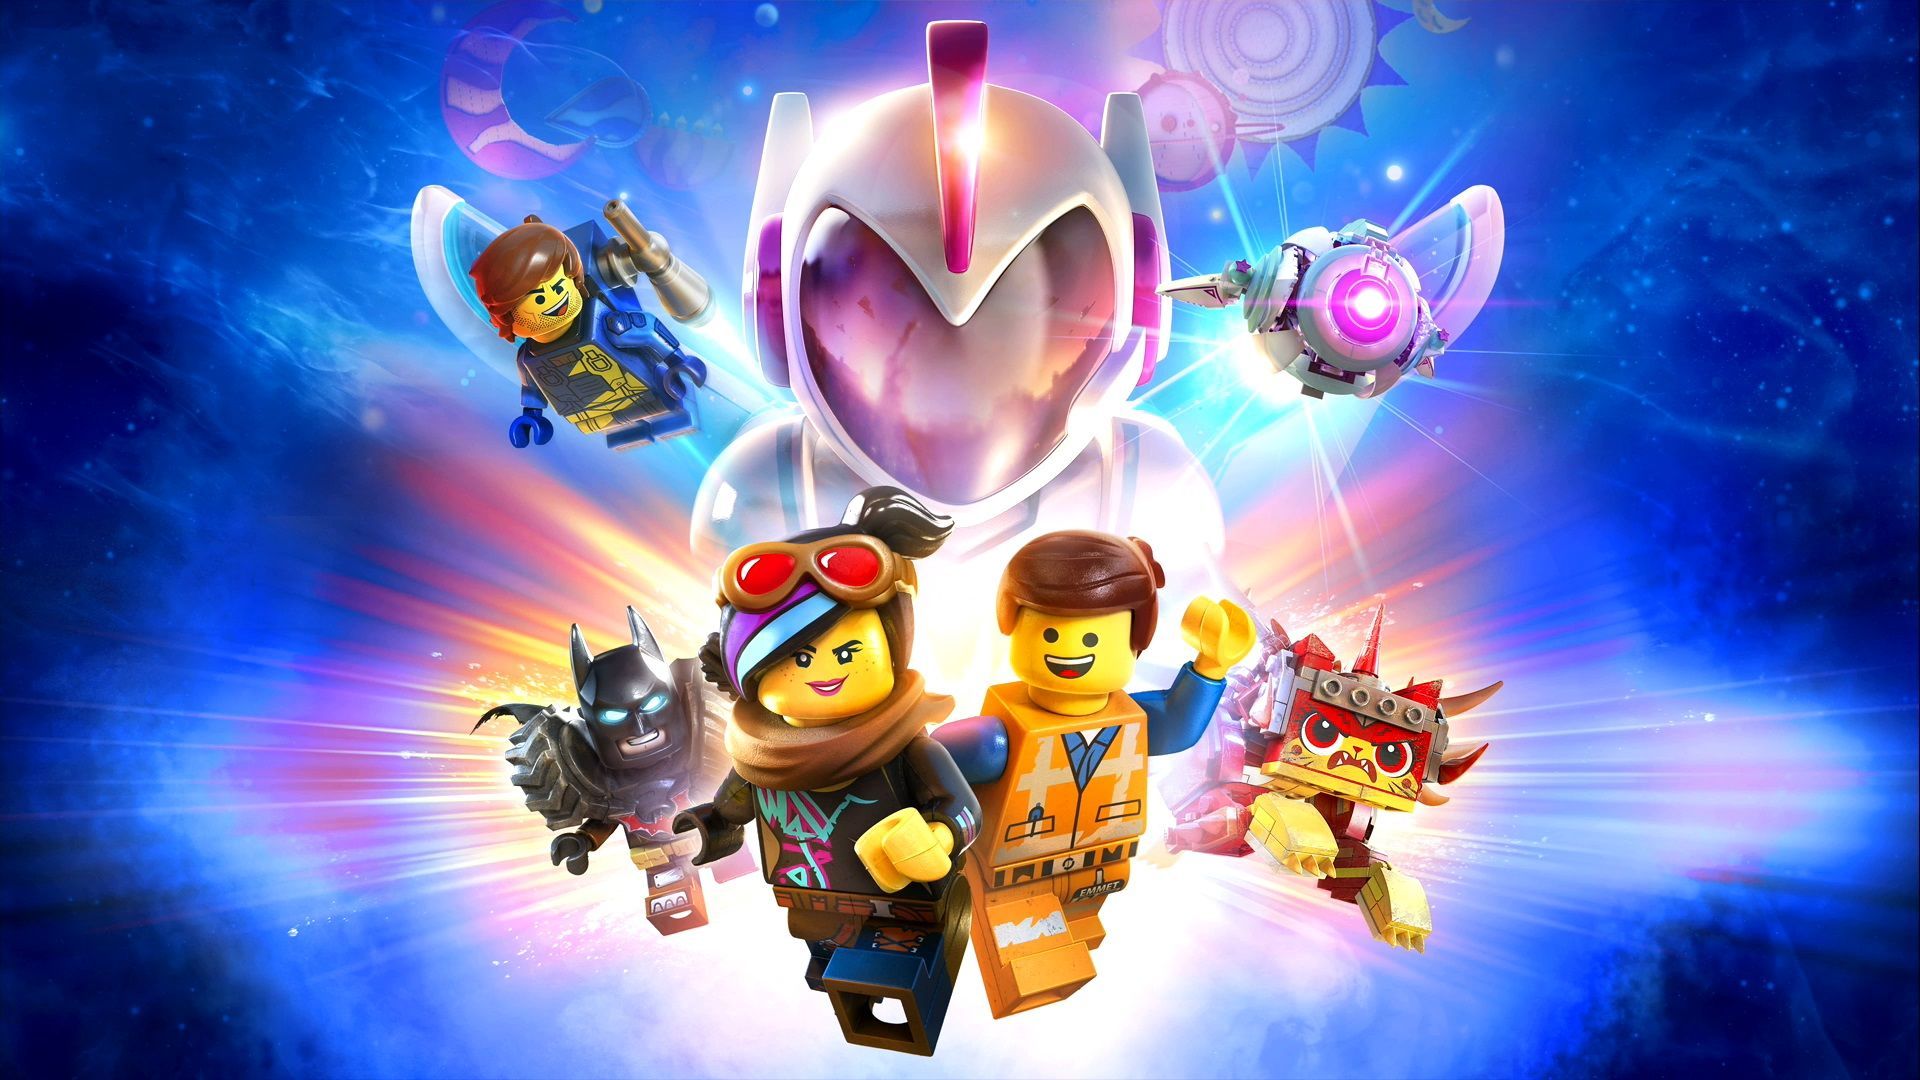 The LEGO Movie 2 - Videogame